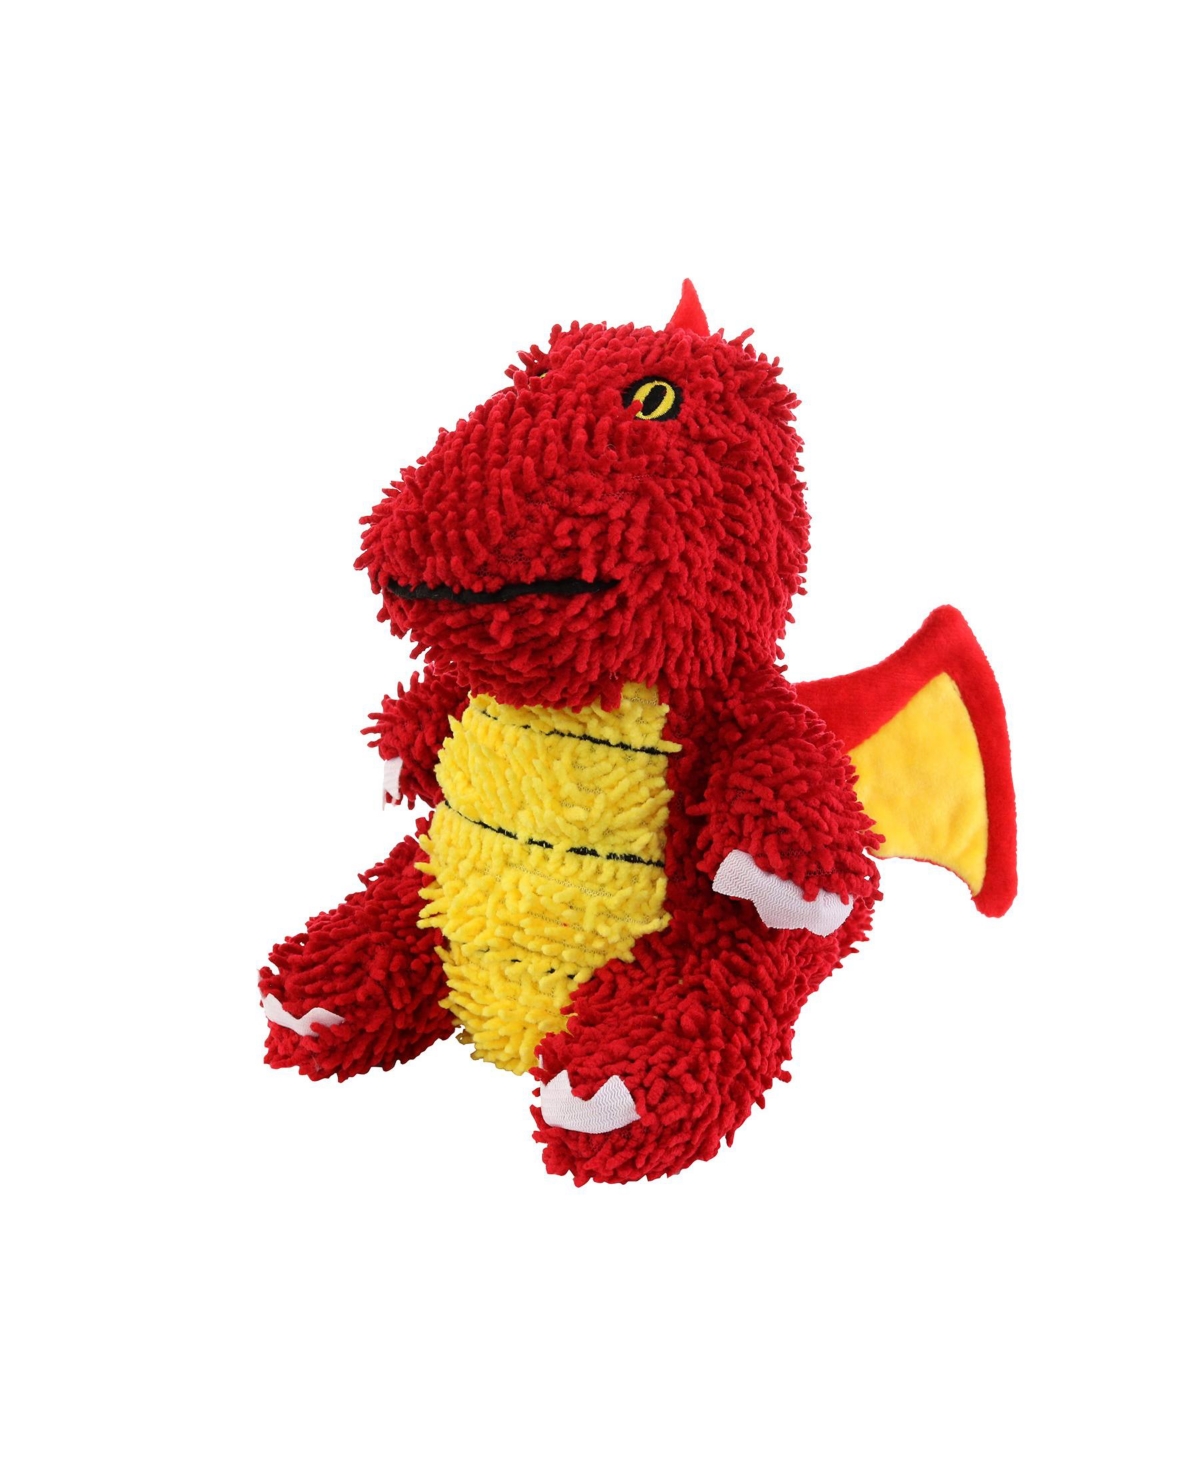 Microfiber Ball Med Dragon Red Squeaker Dog Toy - Red